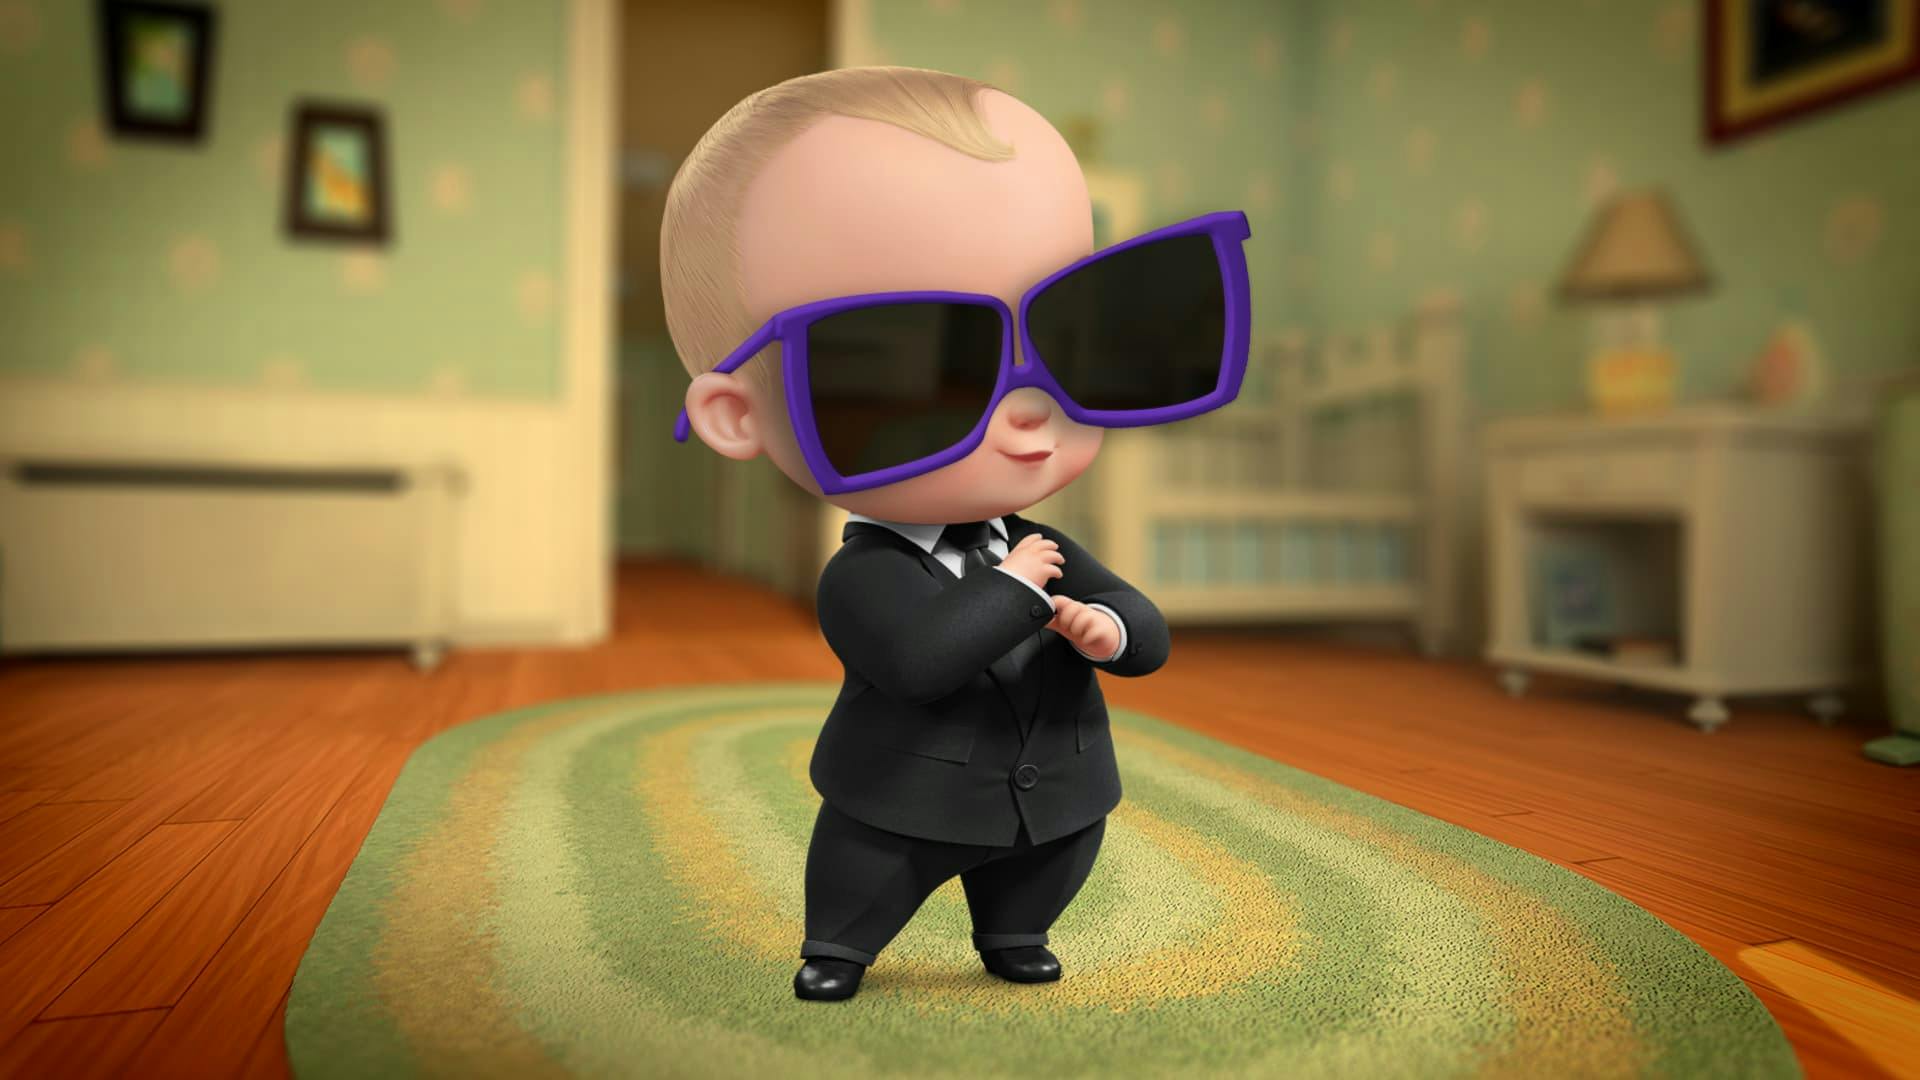 DreamWorks Boss Baby stand in a bedroom wearing over-sized purple framed sunglasses obscuring his eyes from view.